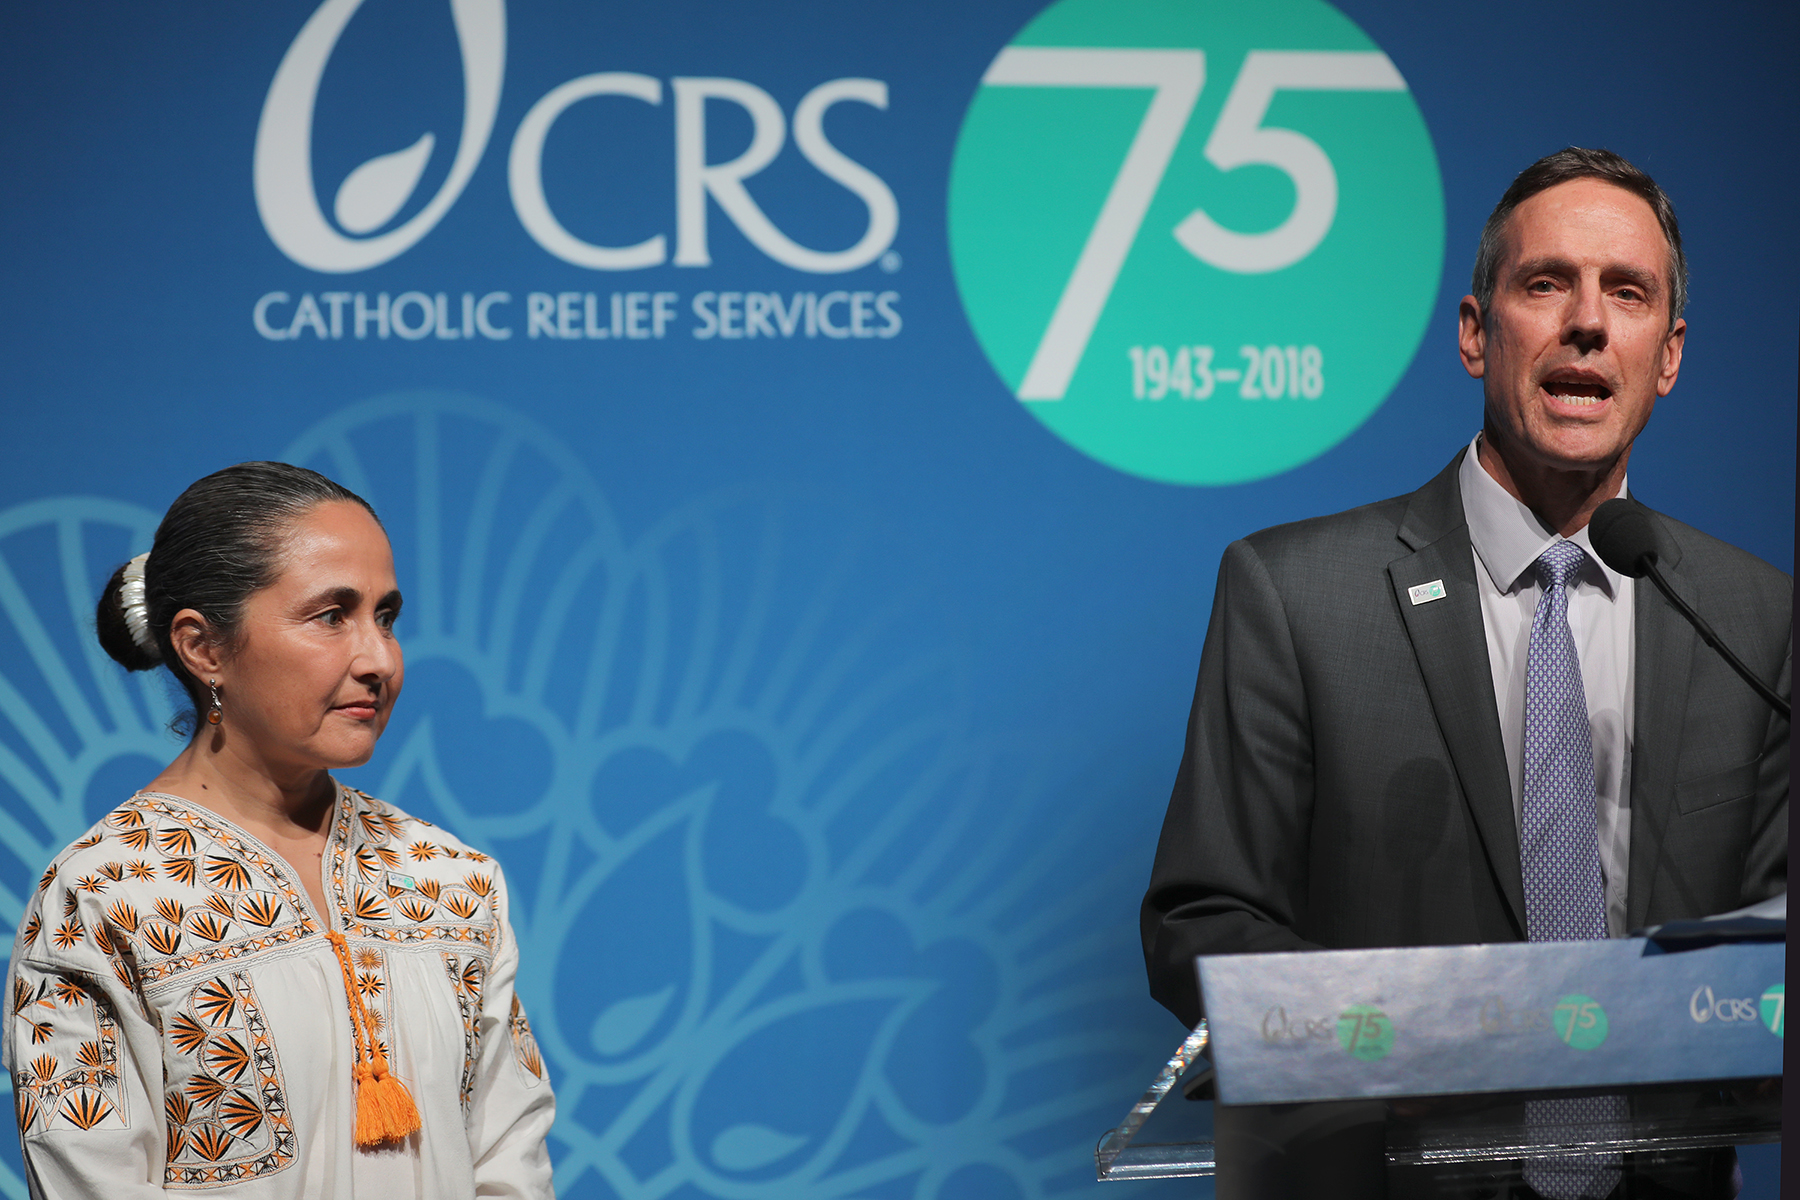 Catholic Relief Services 75 years of restoring people's dignity The